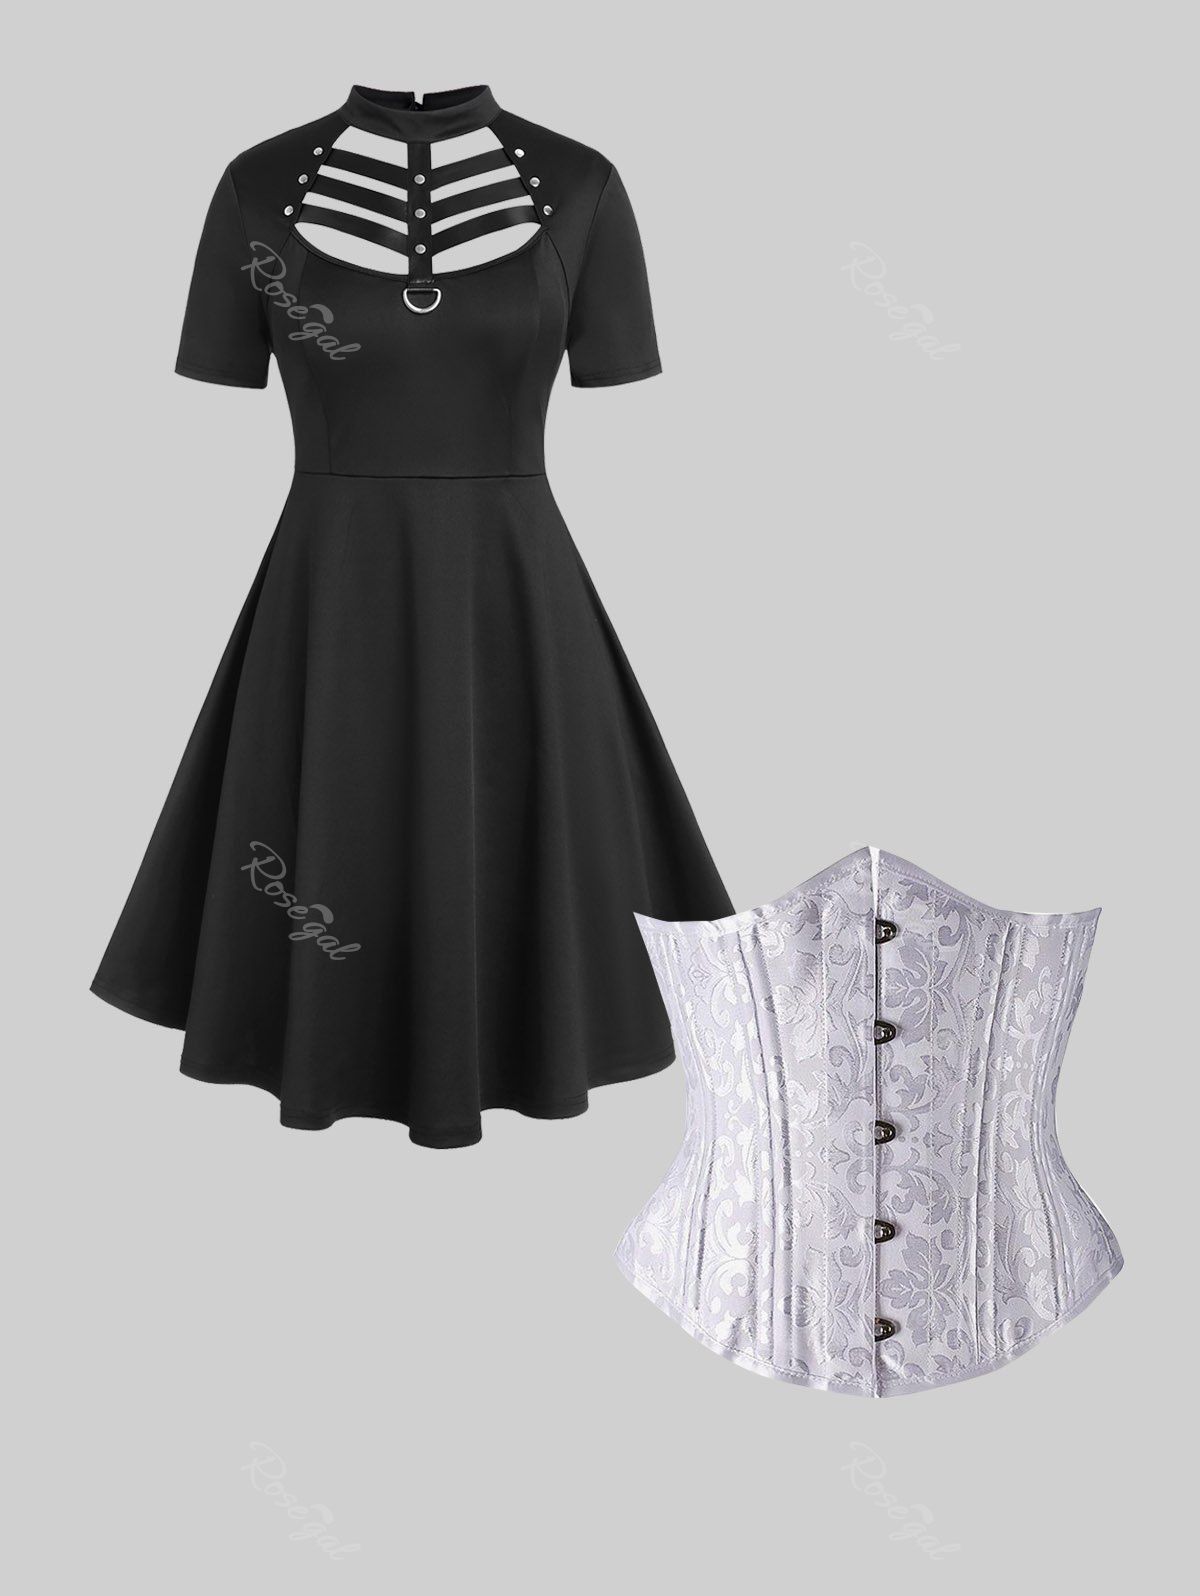 Unique Gothic D-ring PU Leather Panel Ladder Cutout Dress And Gothic Lace-up Boning Underbust Brocade Corset Gothic Outfit  